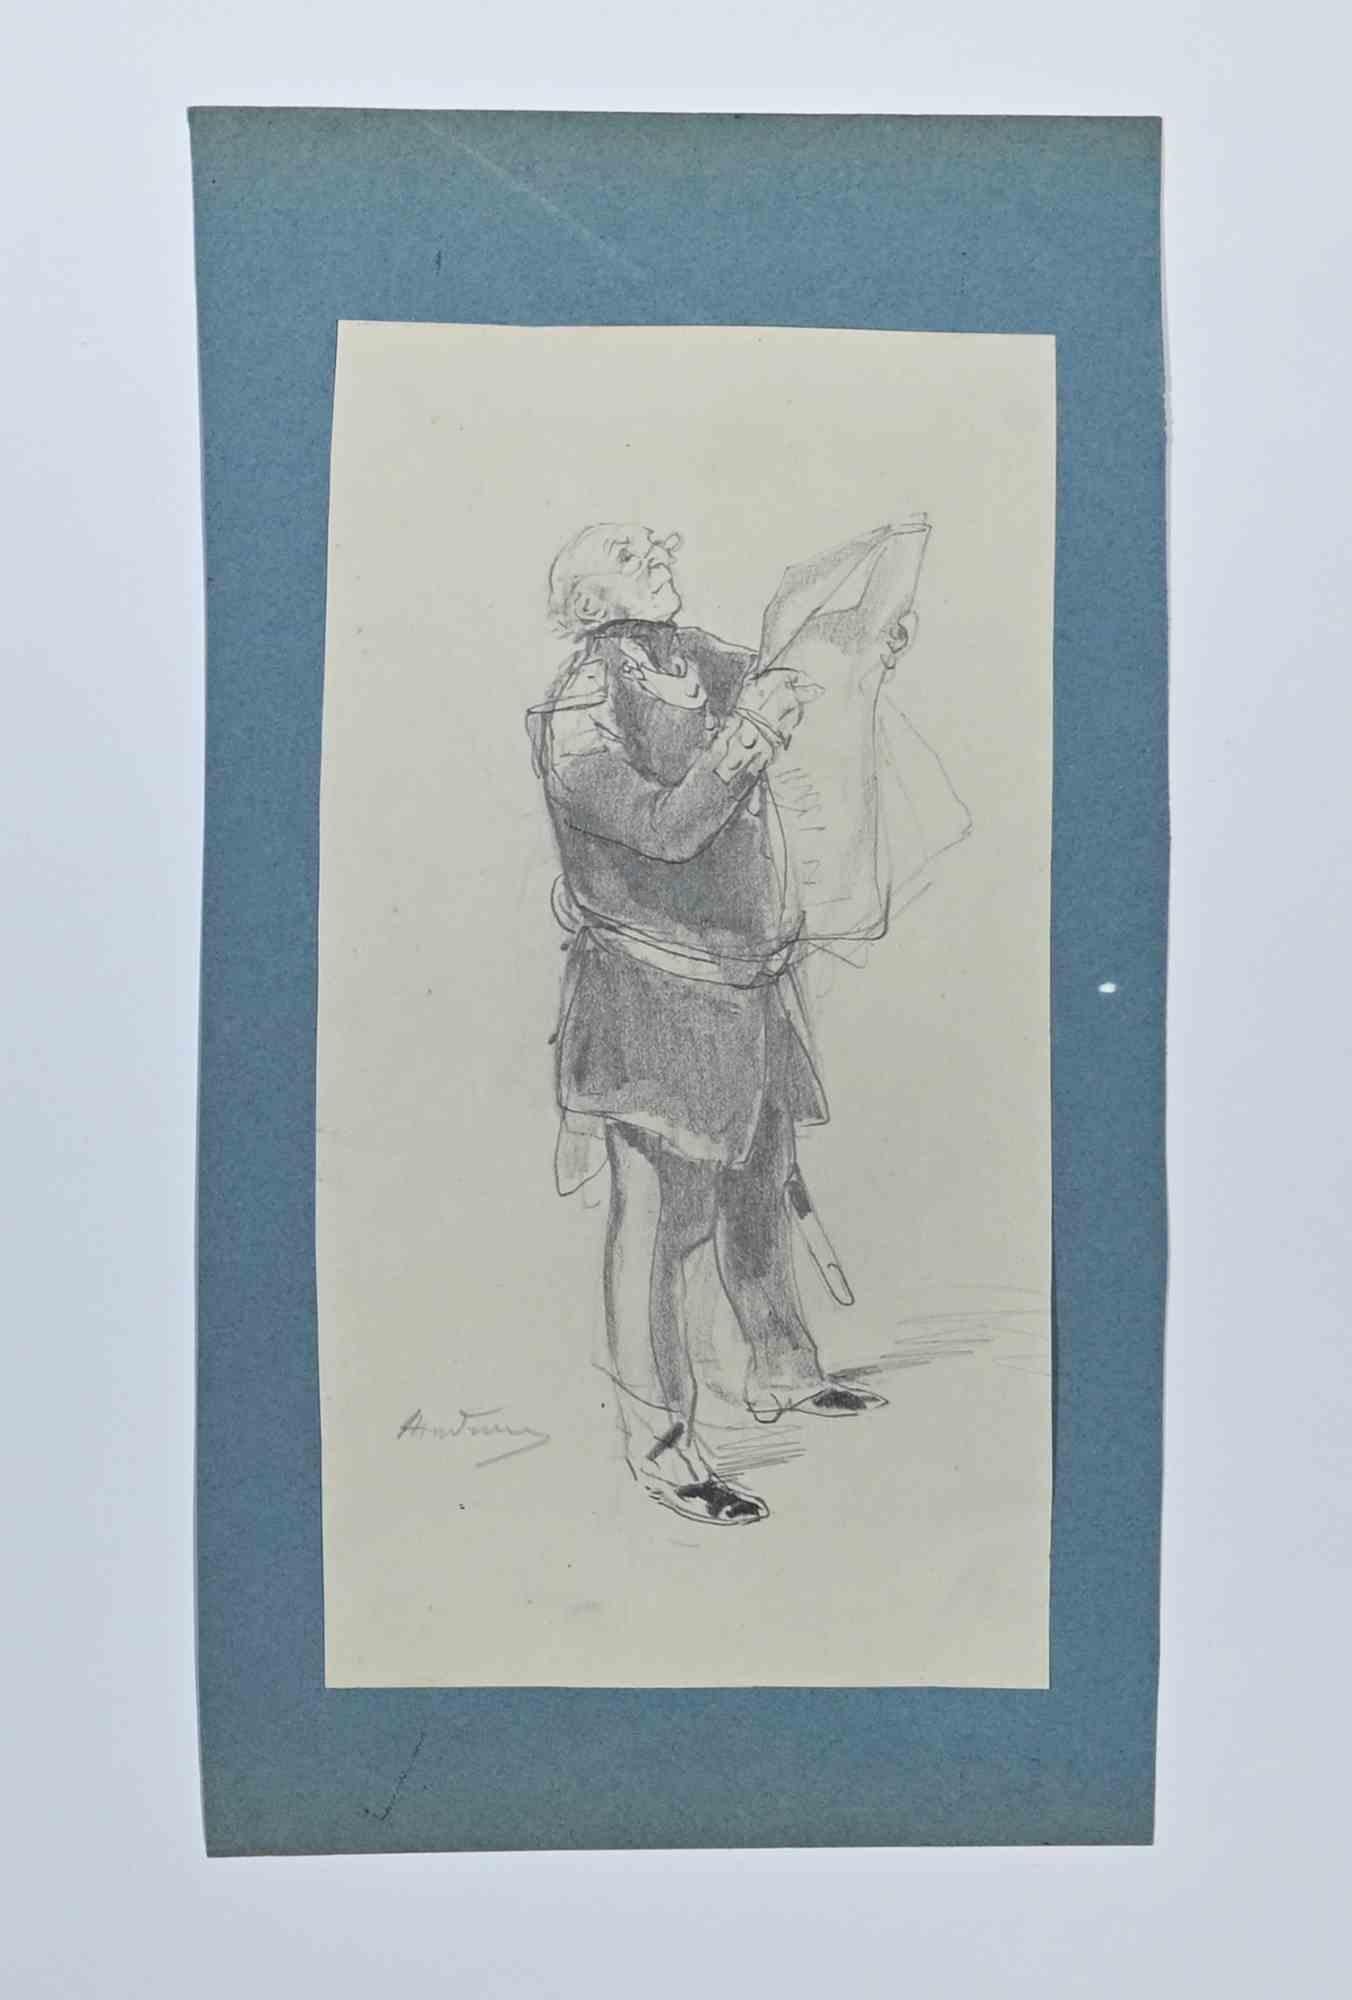 Man Reading is an Original Pencil Drawing realized by Auguste Andrieux.

The artwork is in good condition included a white cardboard passpartout (55x37.5 cm).

Hand-signed by the artist on the lower left corner.

Clément-Auguste Andrieux (7 December